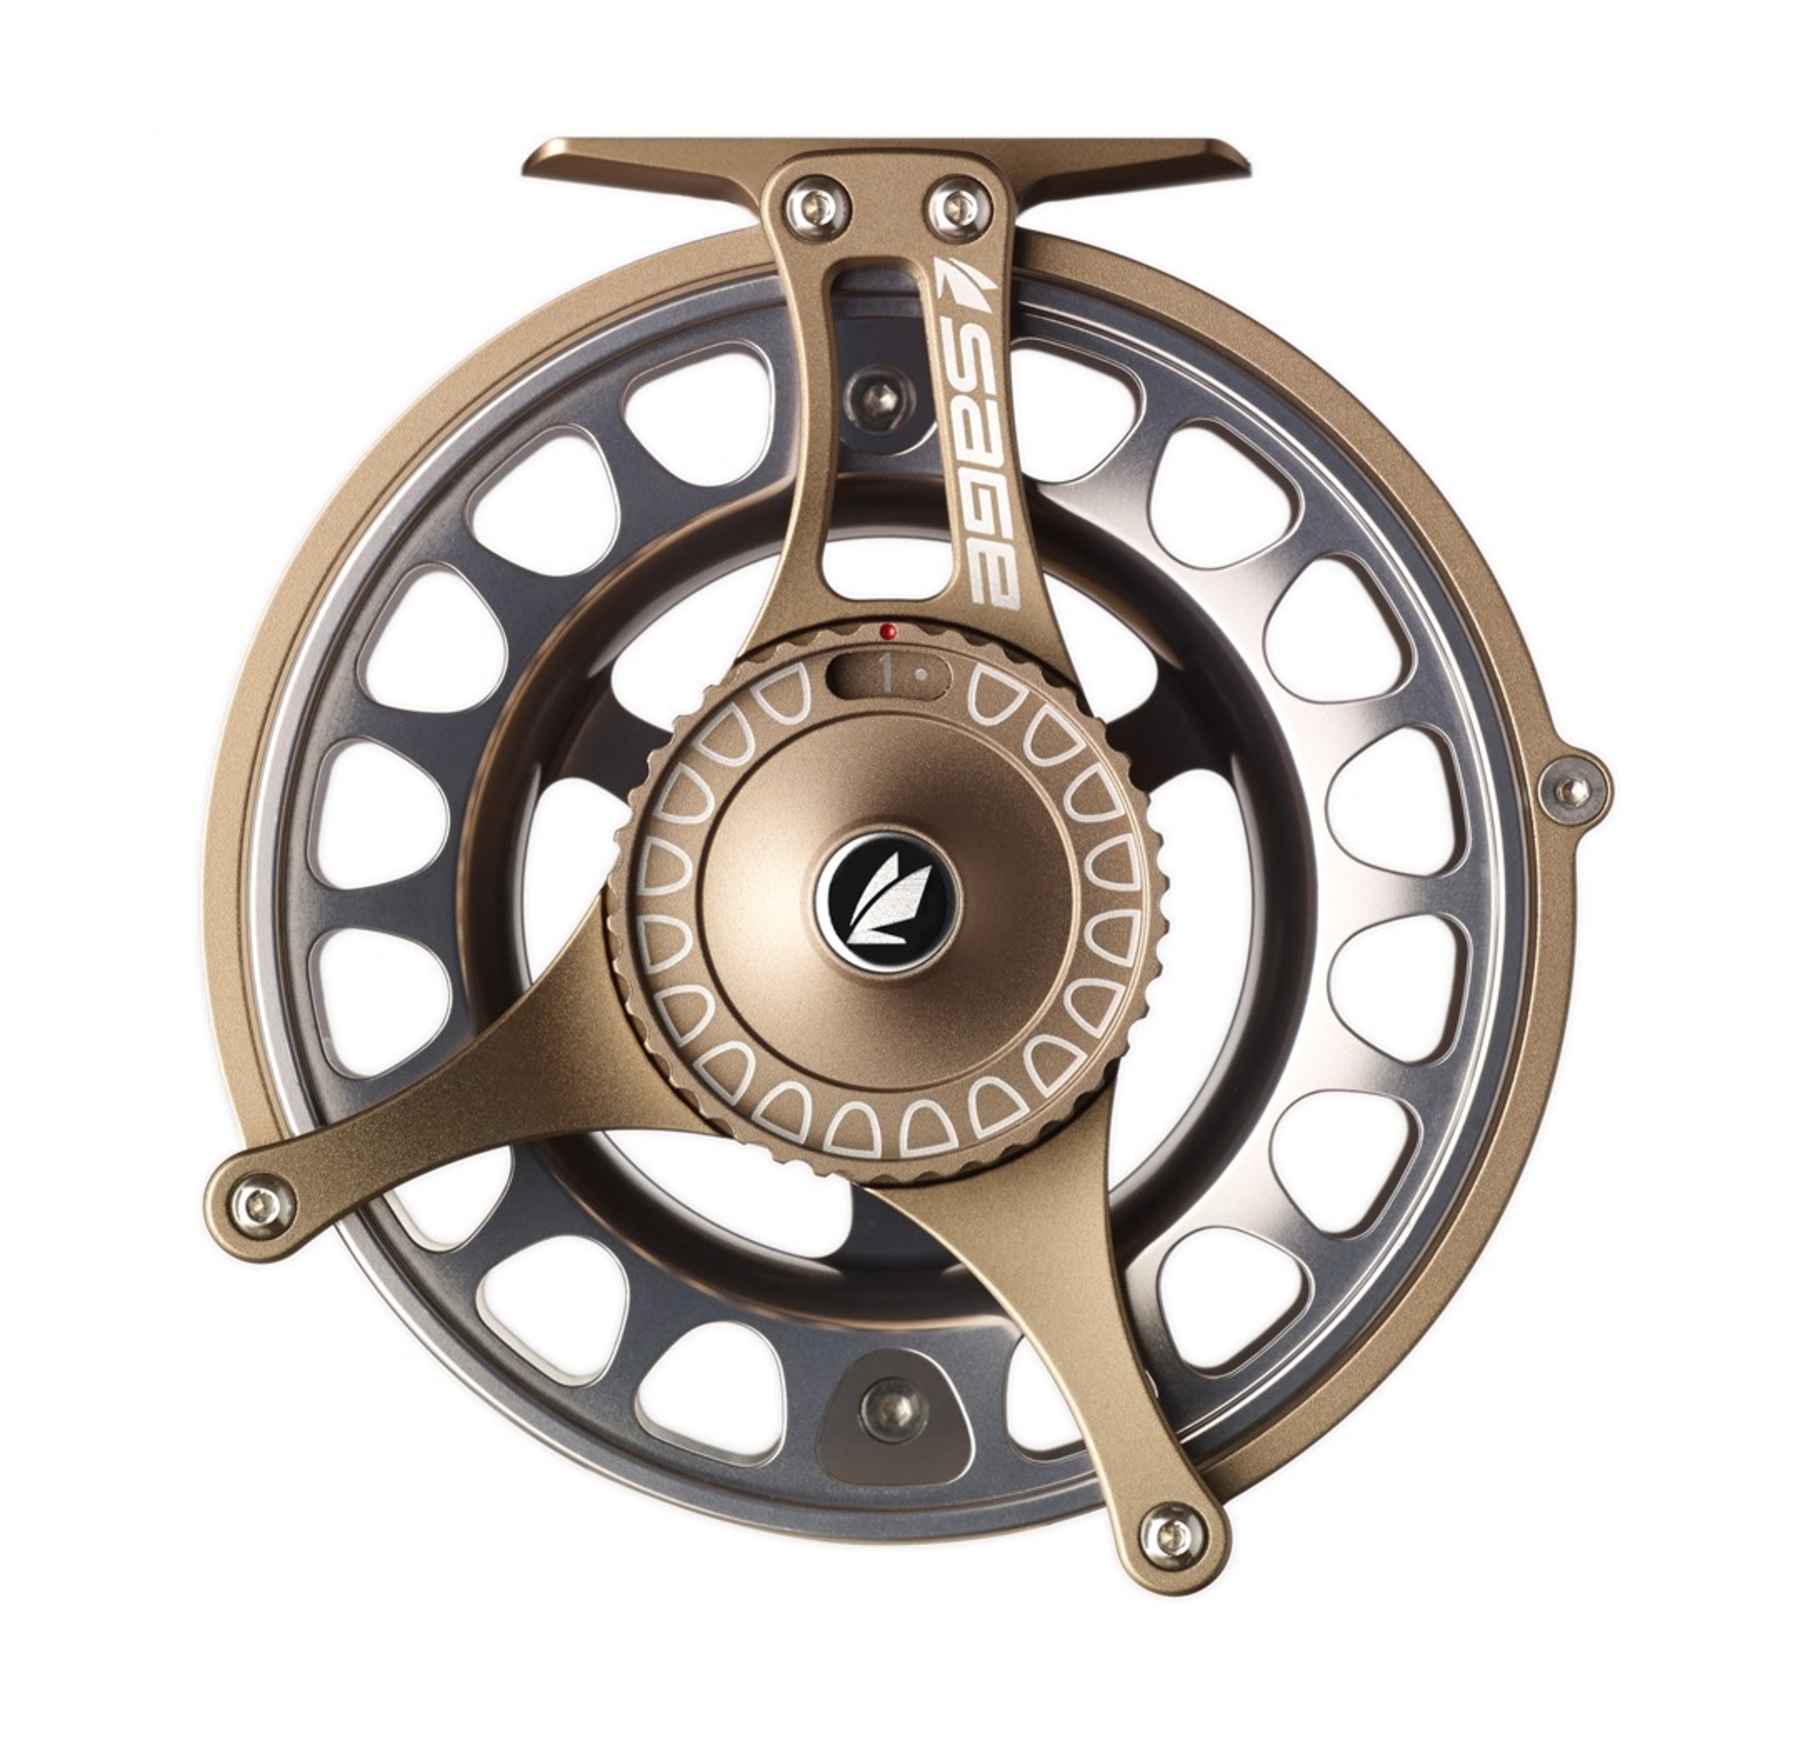 More Gear from Sage: Three New Reels